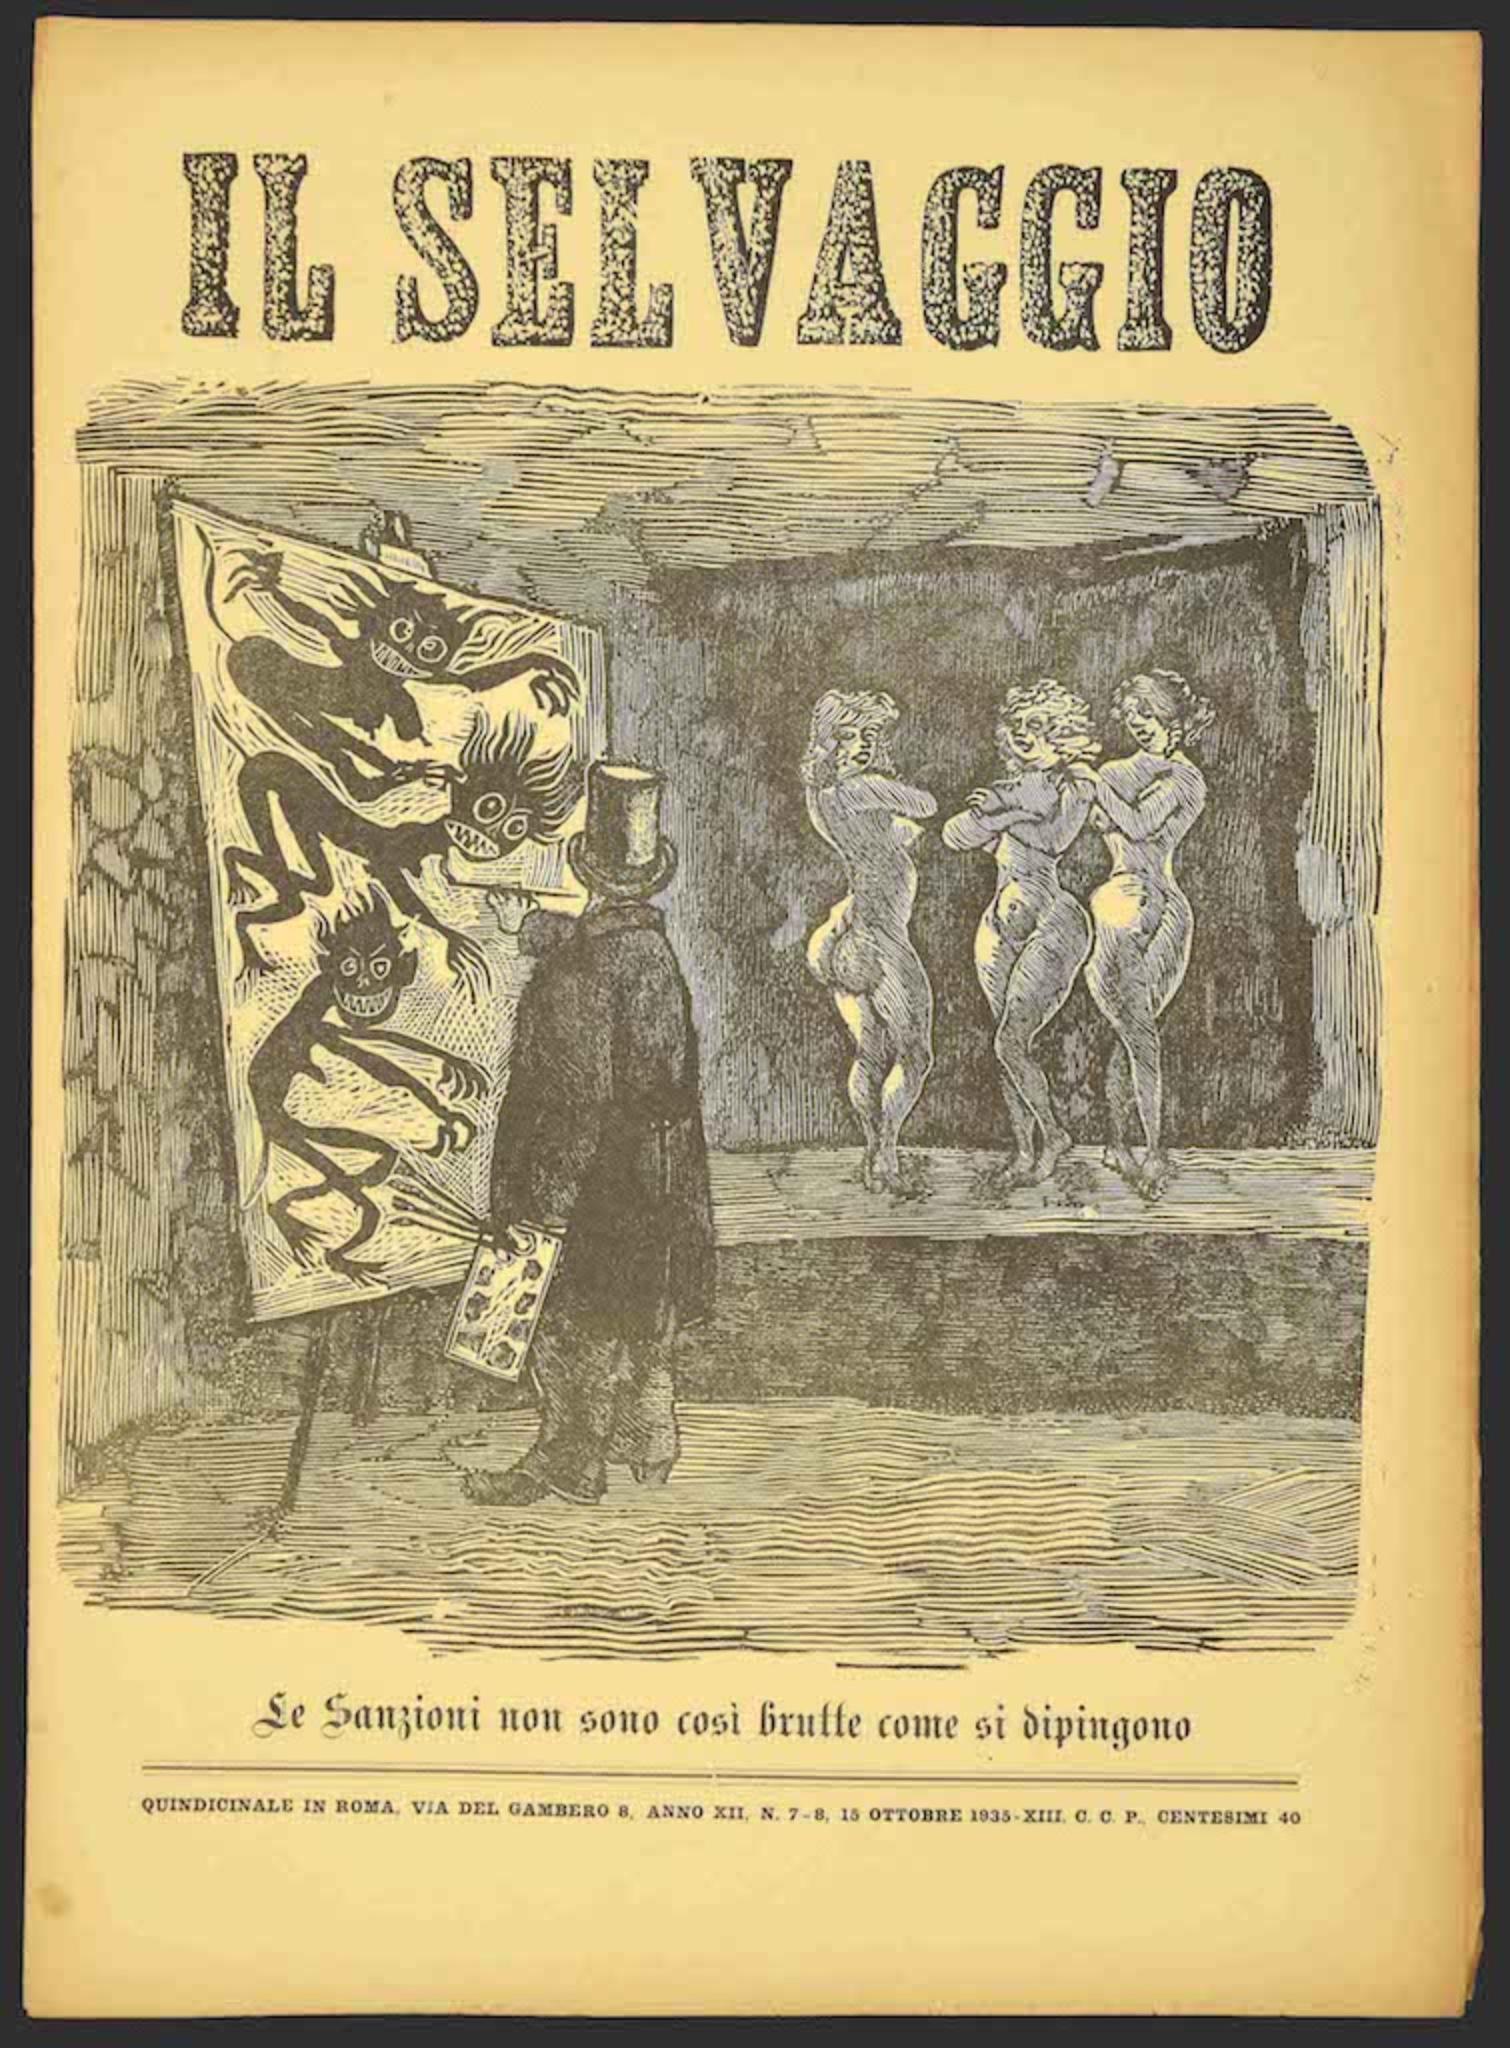 "Il Selvaggio, no.7-8- 1935", "Annual supporter subscription - Una Copia 40 Cent - Fortnightly Newspaper  of arts and science", including original woodcut prints by the artist Mino Maccari. 8 pages.

Good conditions, with small ripping and stain